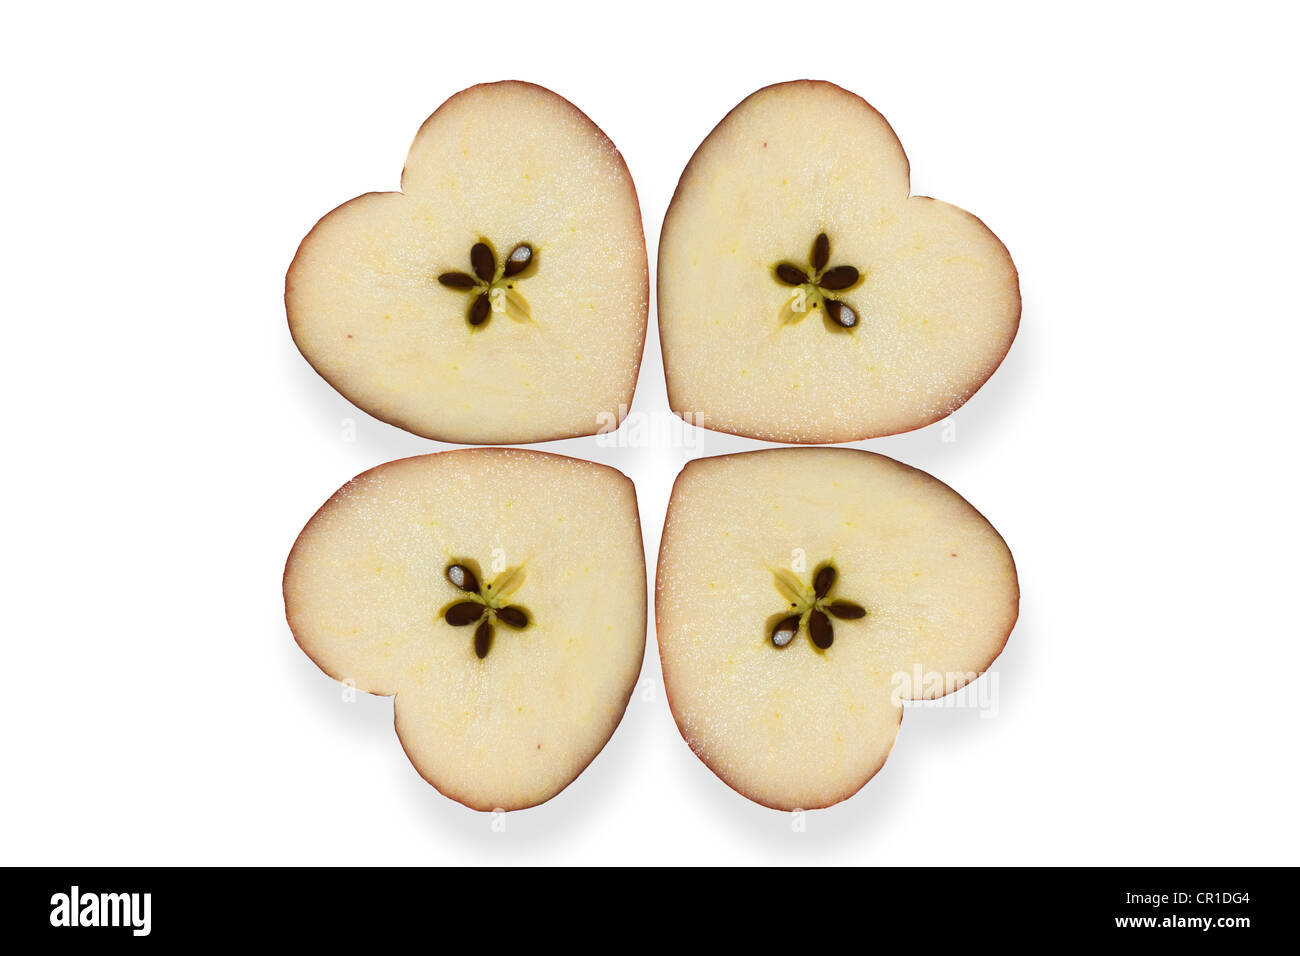 Heart-shaped apples making a clover Stock Photo